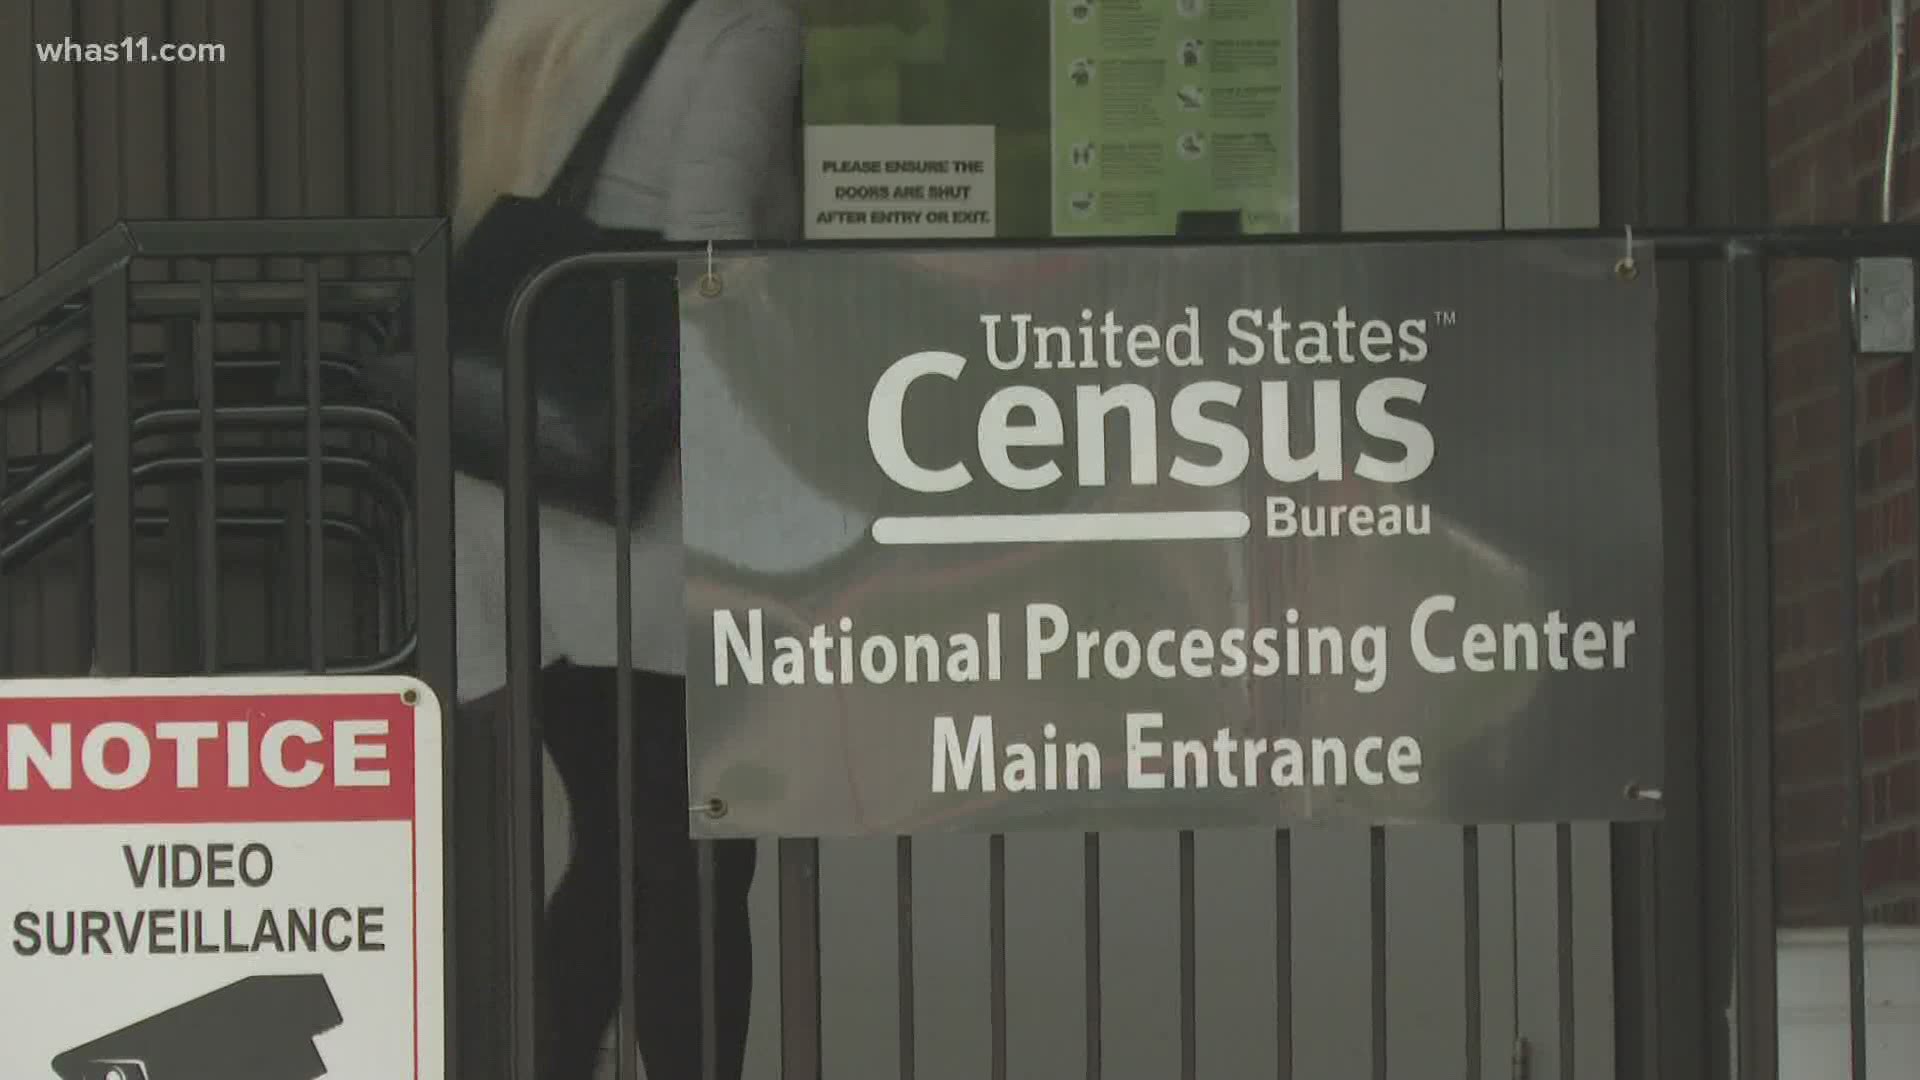 So far, 19 million census forms have been fully processed and delivered at the Jeffersonville and Arizona national processing centers.